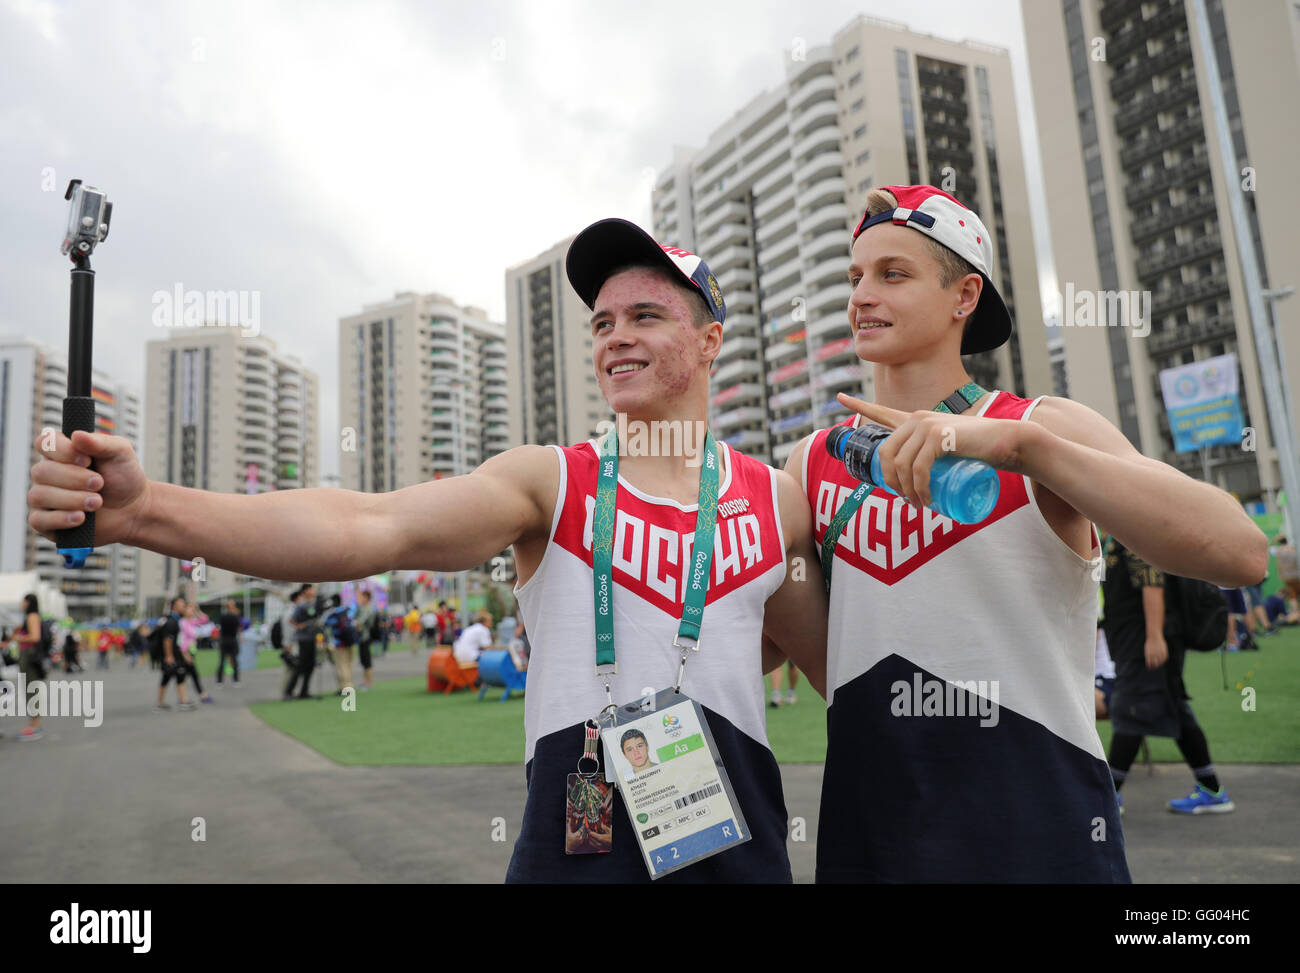 Rio de Janeiro, Brazil. 2nd Aug, 2016. Gymnastics Nikita Nagornyy (L) and Ivan Stetovich of Russia pose for a selfie during the Media day at the Olympic Village Barra prior to the Rio 2016 Olympic Games in Rio de Janeiro, Brazil, 2 August 2016. Rio 2016 Olympic Games take place from 05 to 21 August. Photo: Michael Kappeler/dpa/Alamy Live News Stock Photo